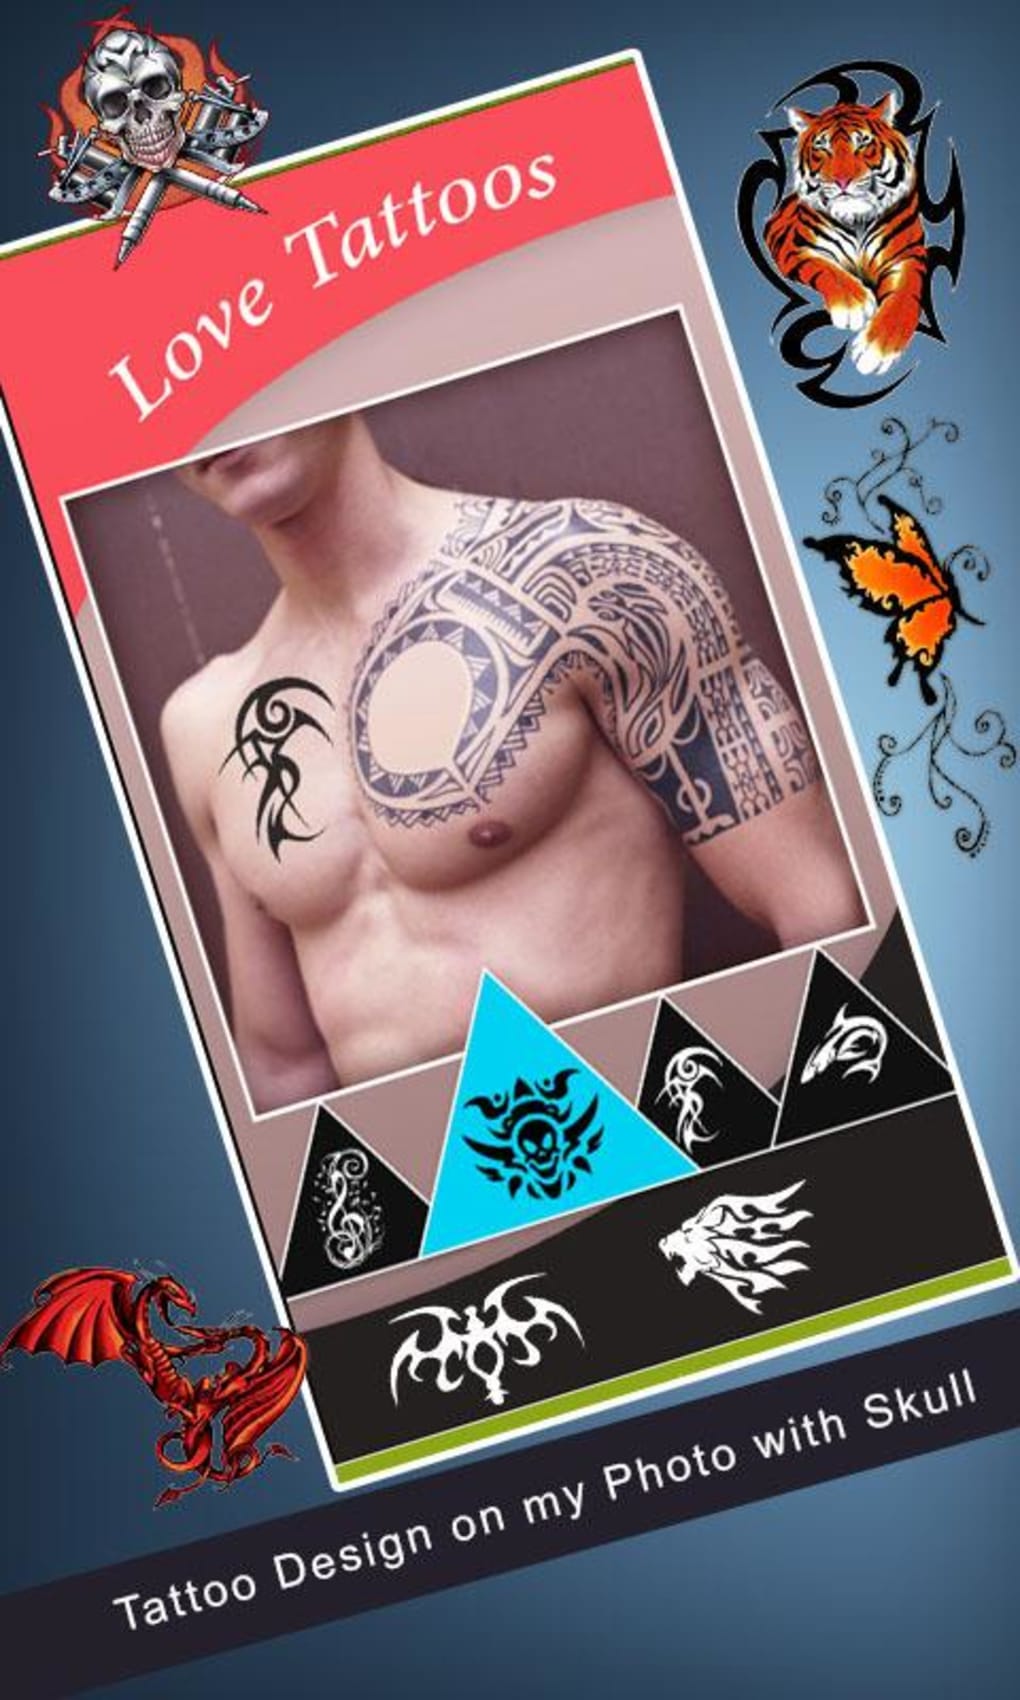 Tattoo Maker APK Download for Android Free